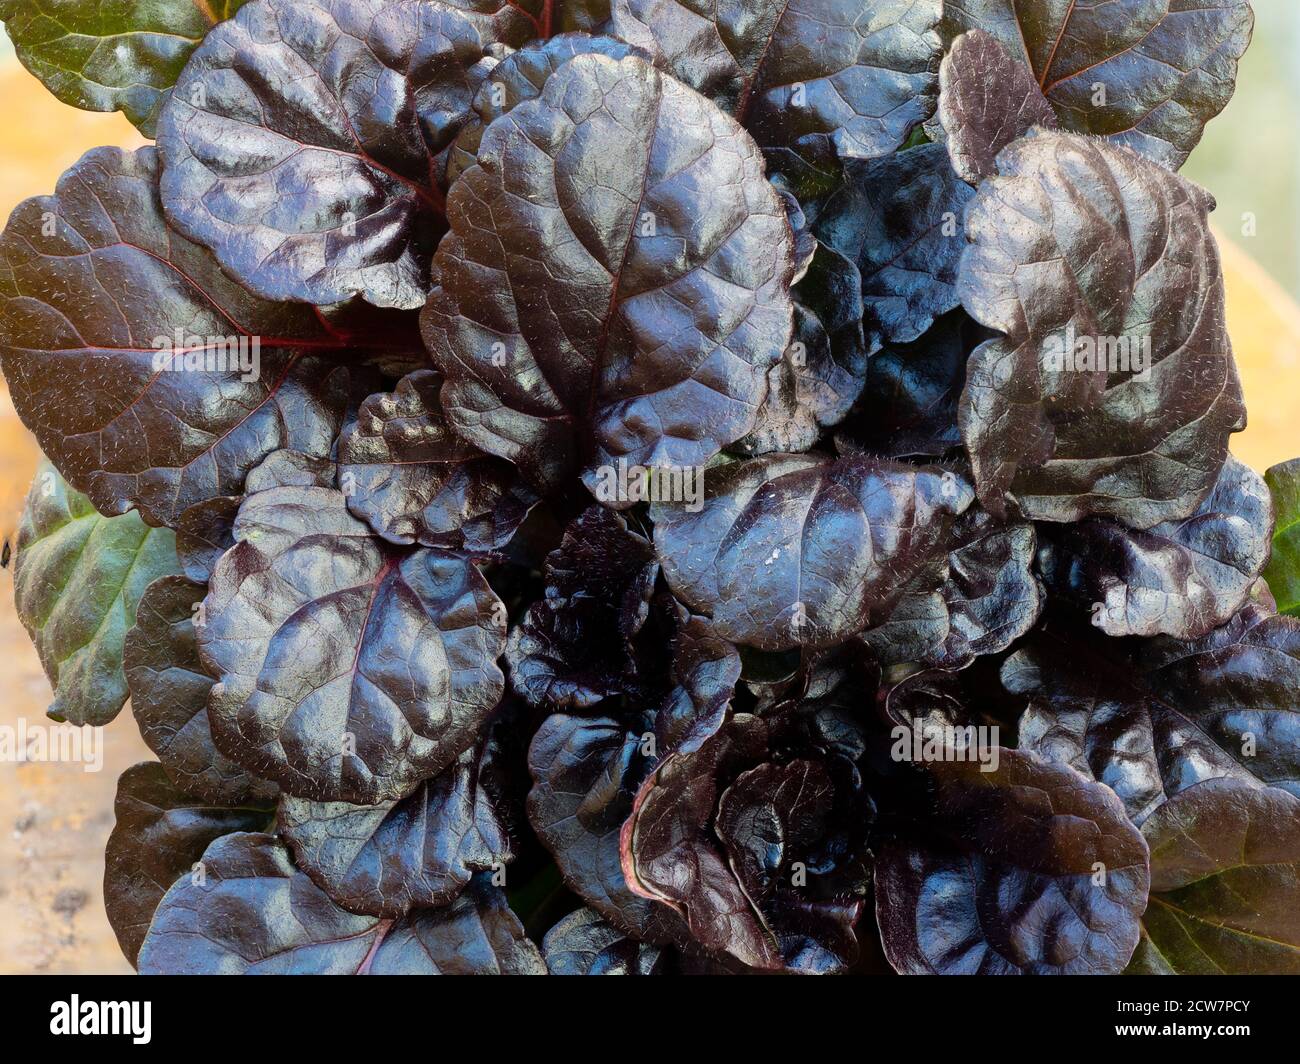 Dark bronze, almost black foliage of the low growing hardy evergreen ground cover perennial, Ajuga reptans 'Black Scallop' Stock Photo